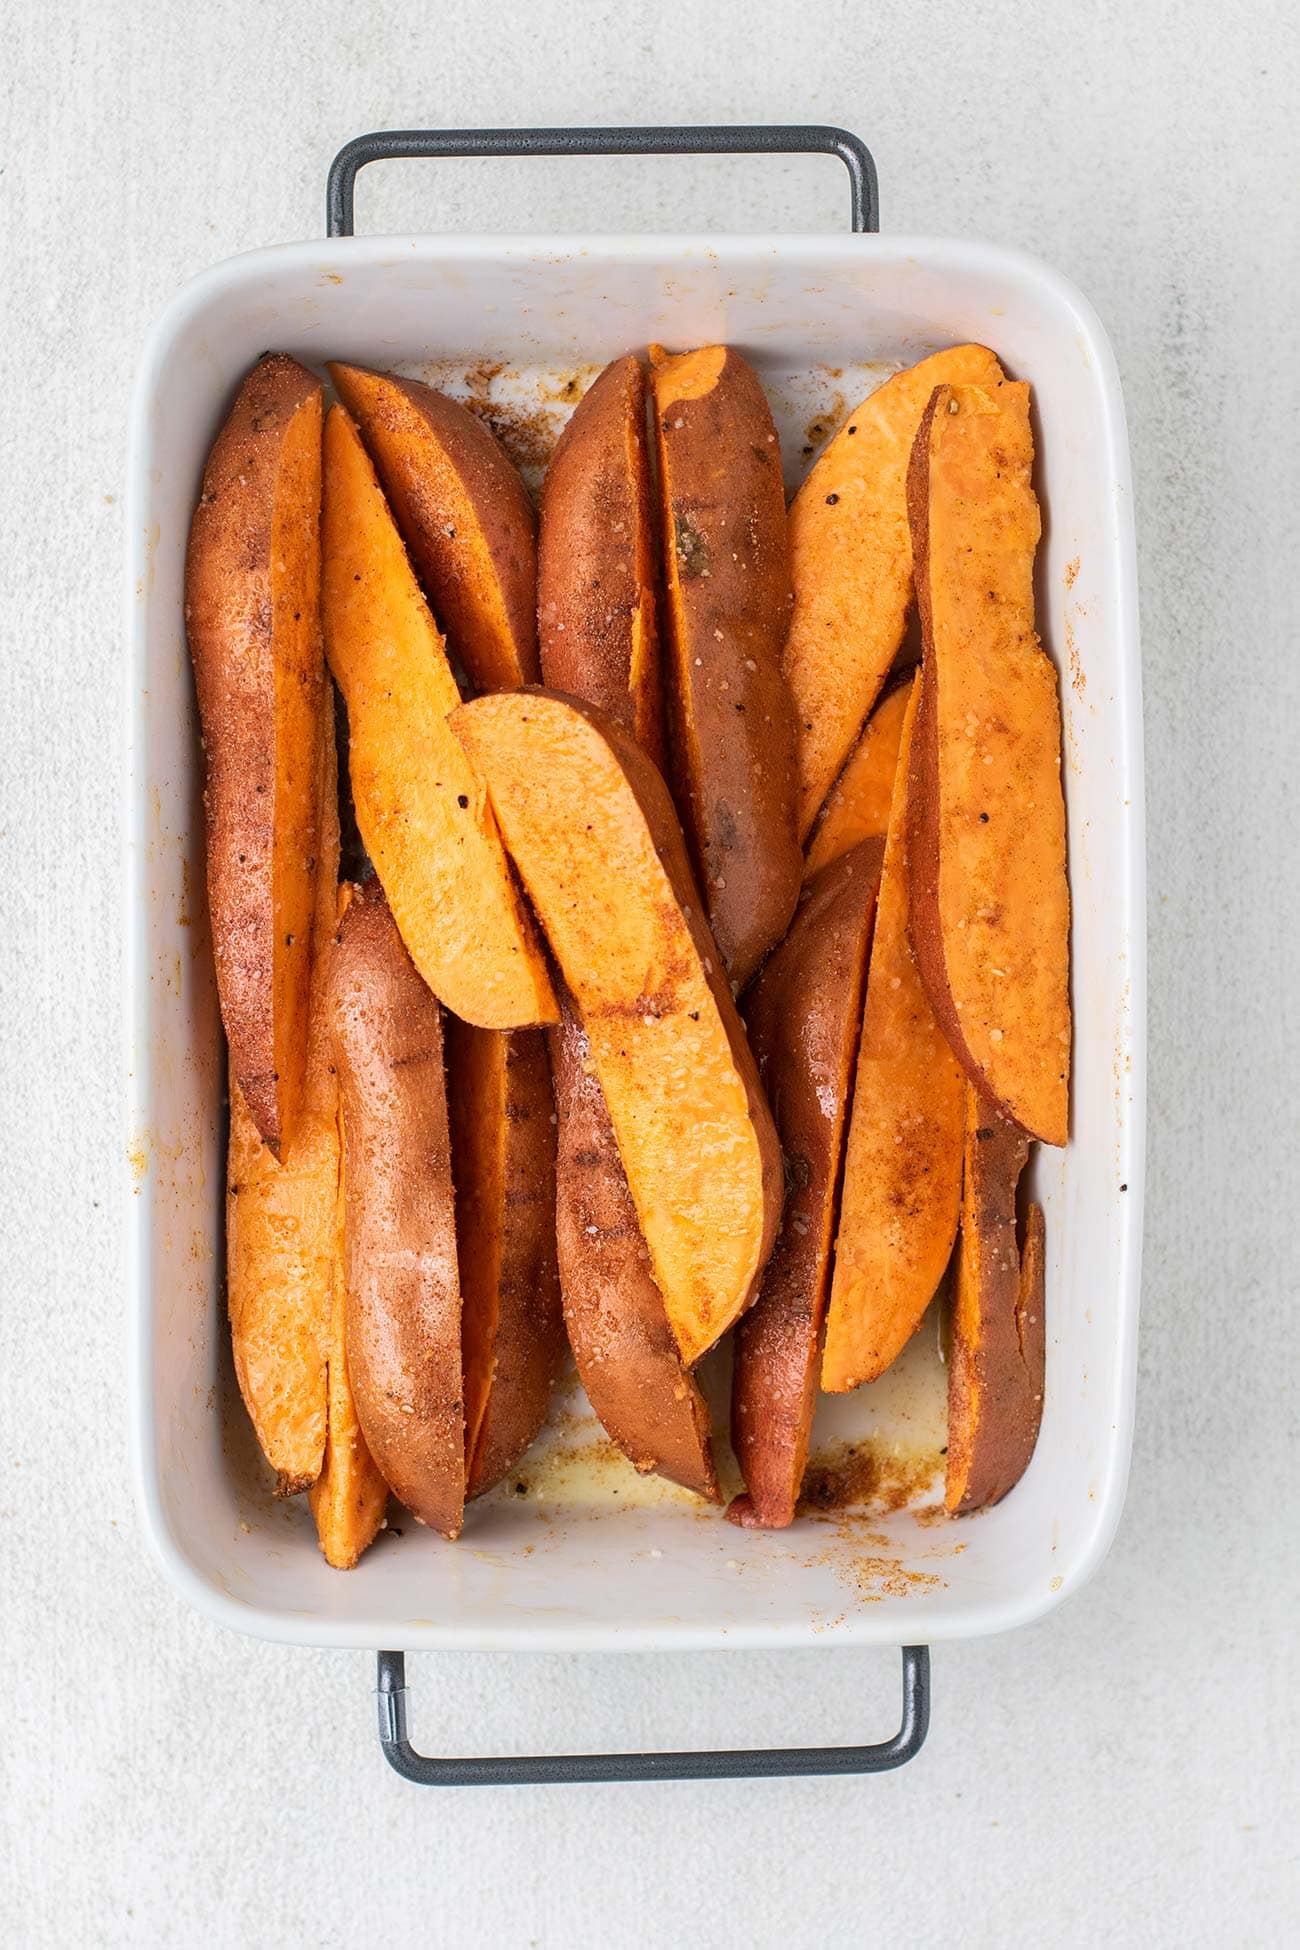 Sweet potato wedges shown with a seasoning rubbed into them.